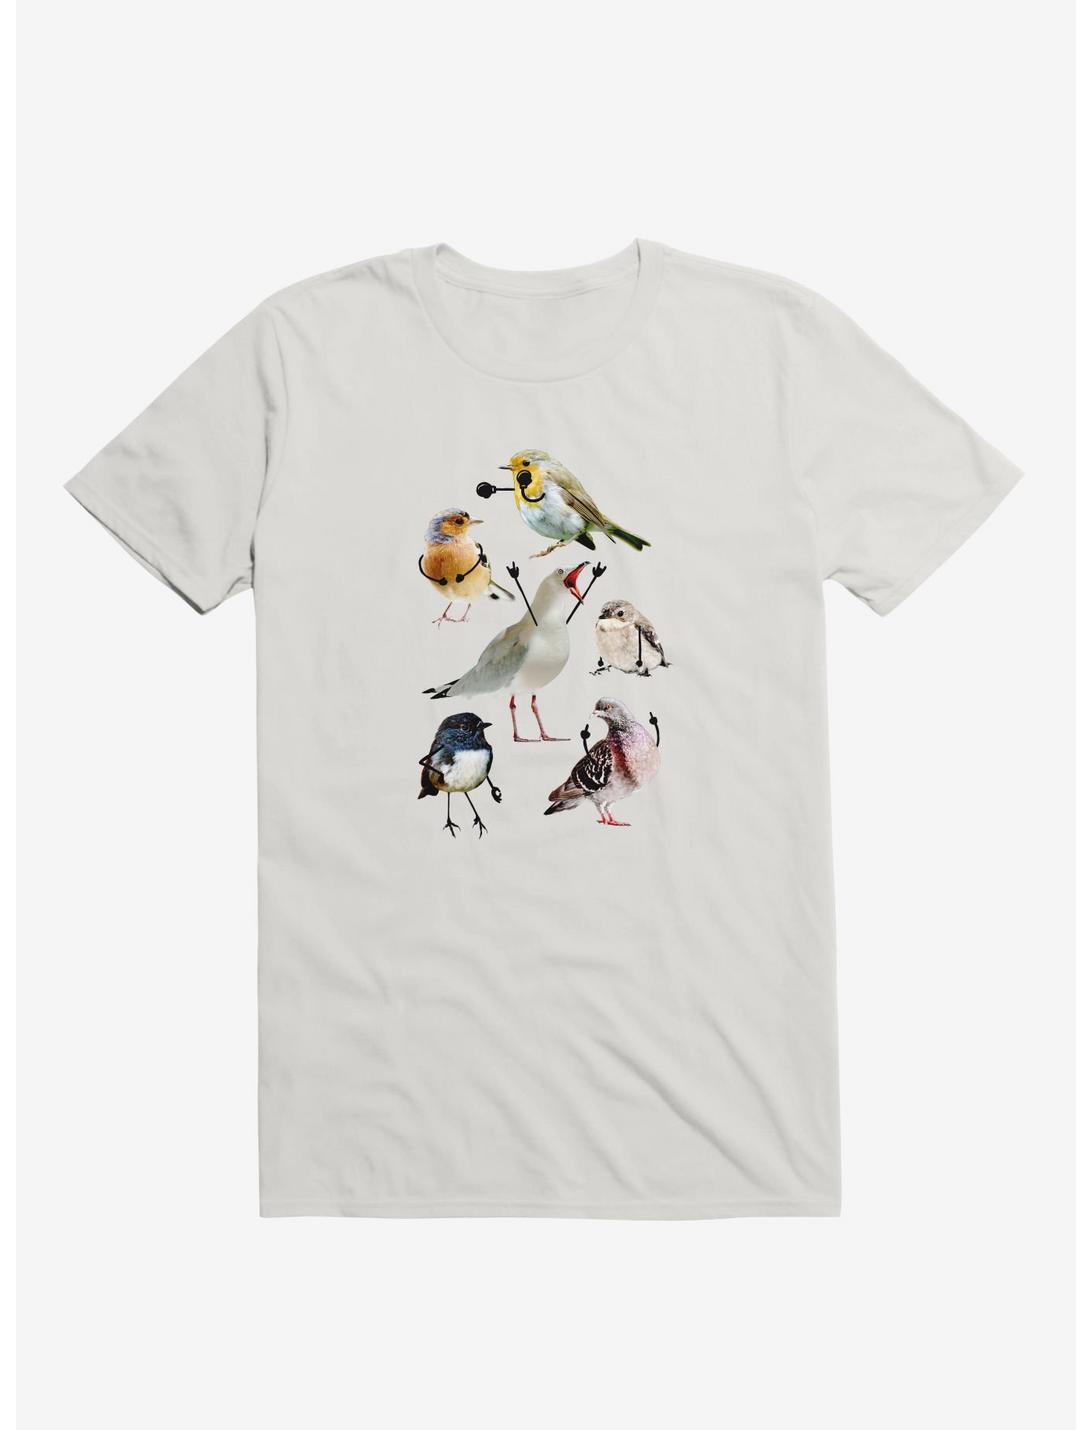 Birds With Arms T-Shirt, WHITE, hi-res